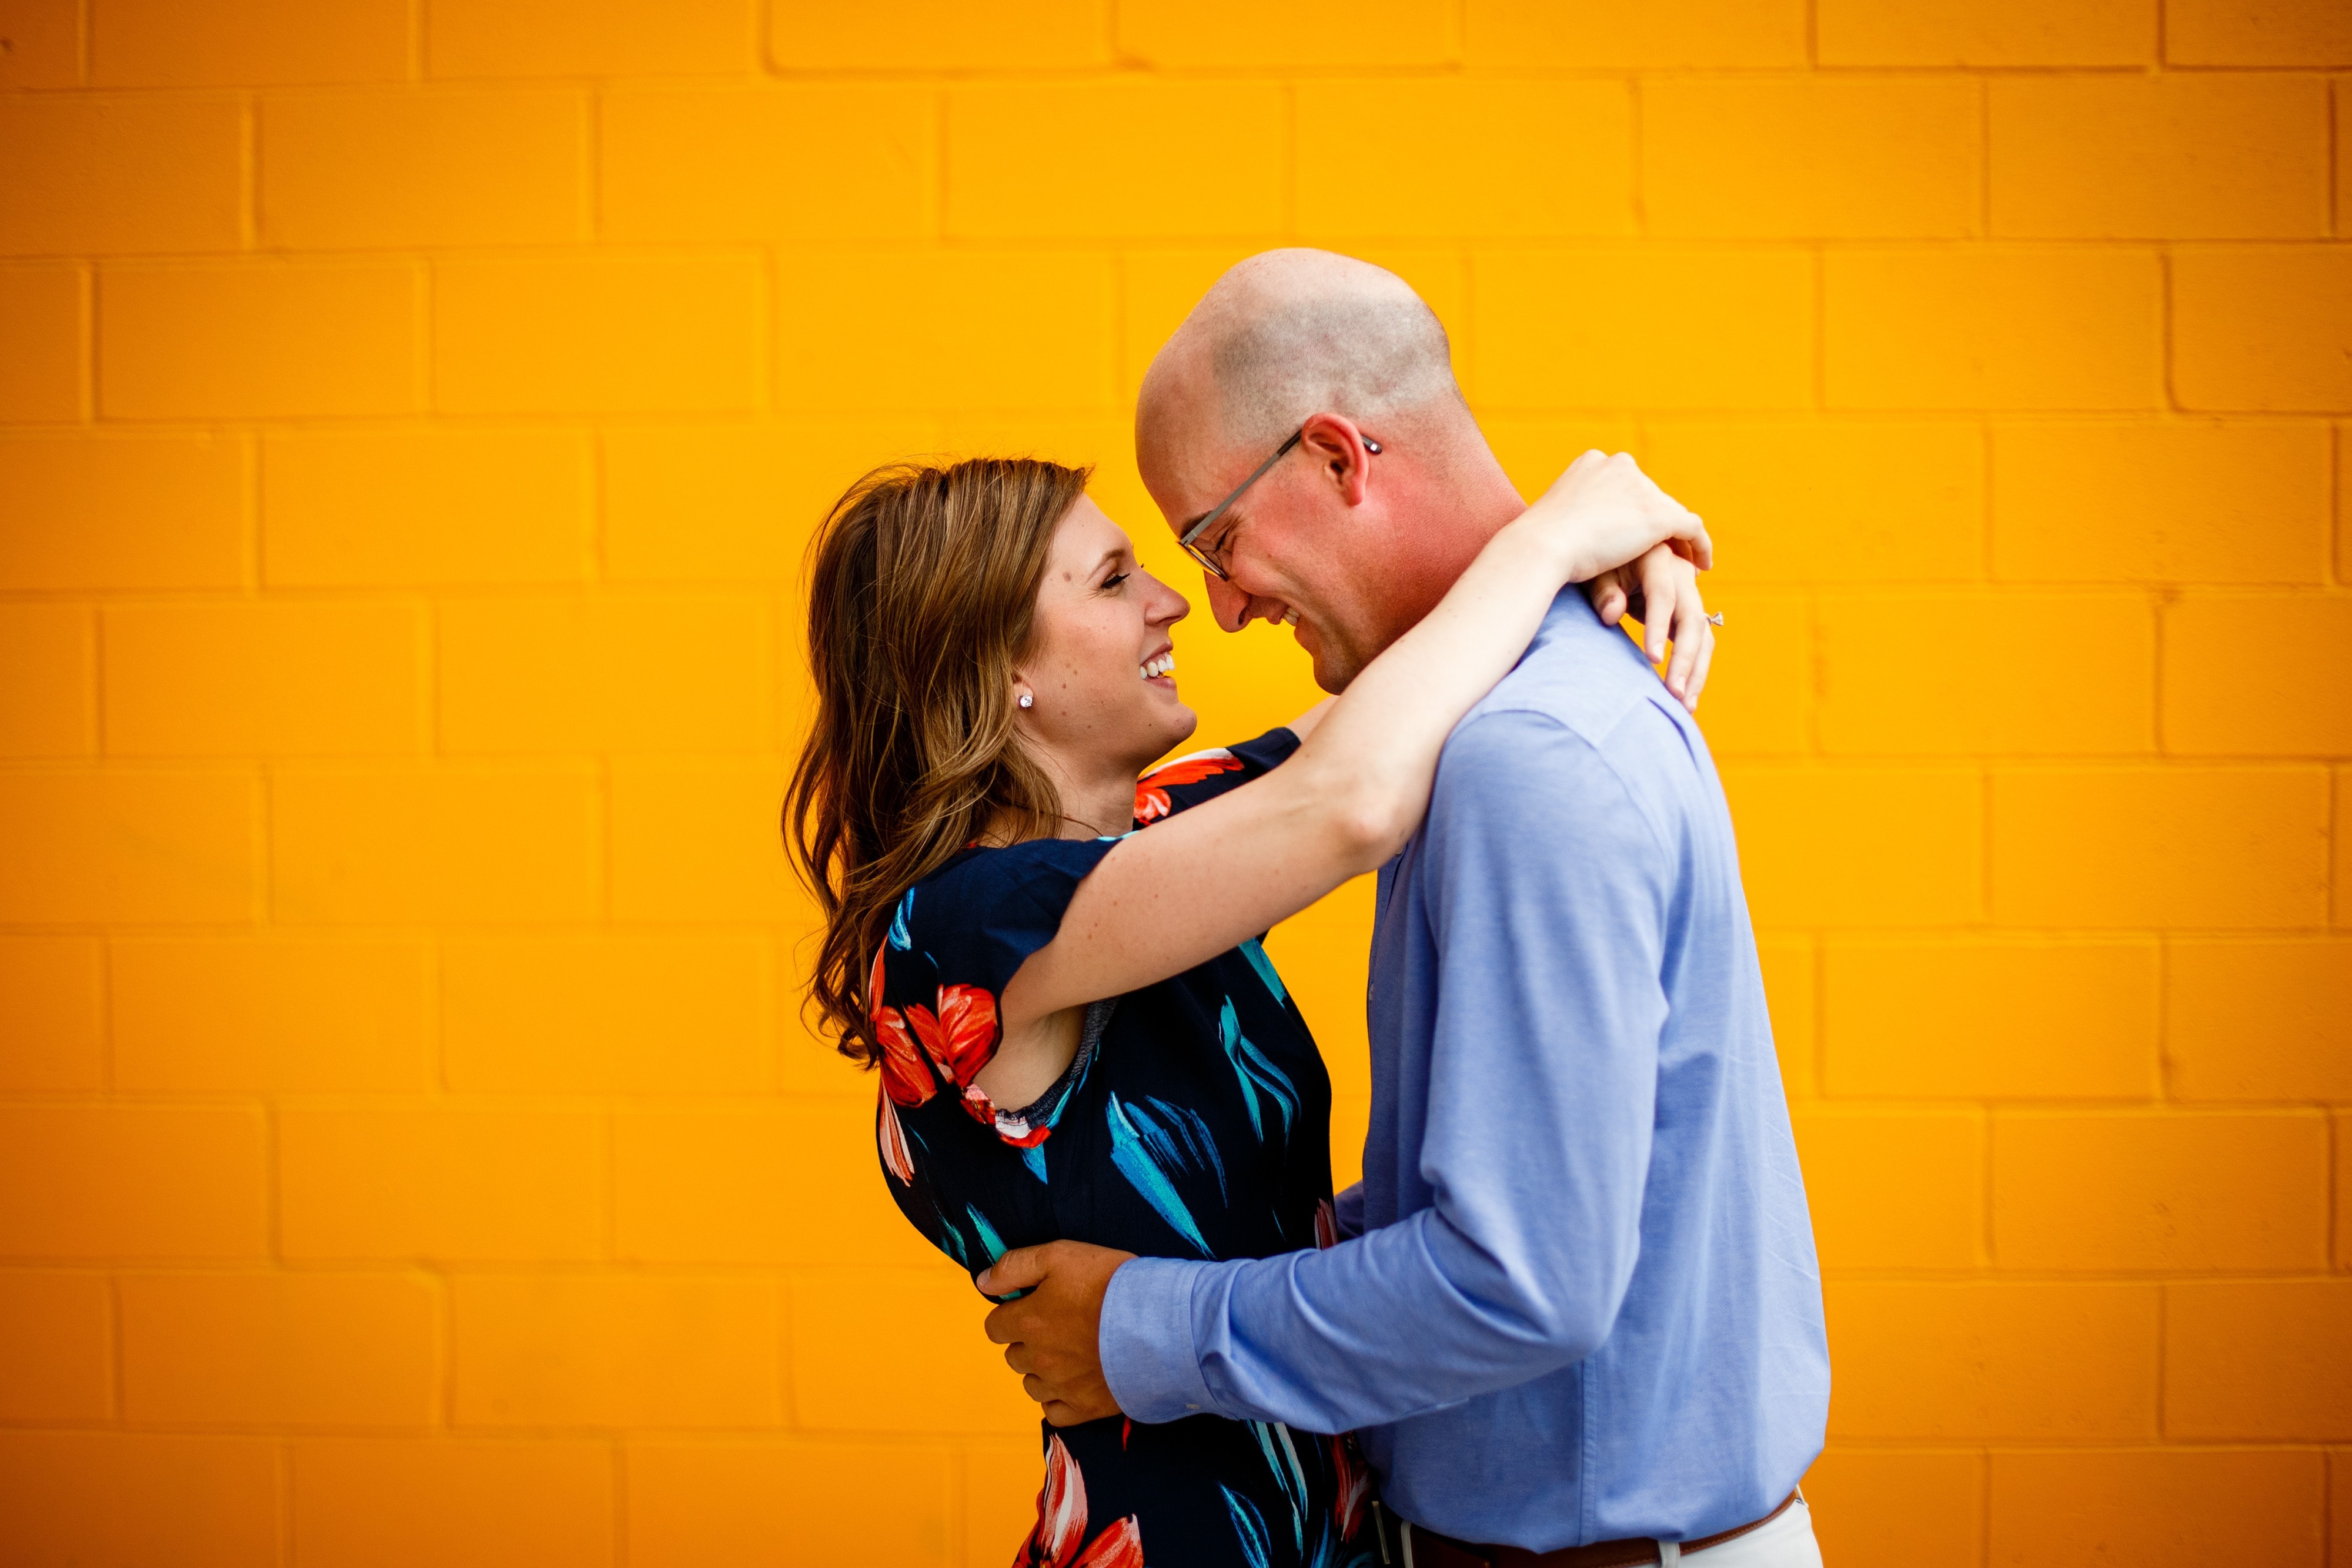 Erica and Cody embrace in front of a tangerine colored wall during their summertime engagement photos in Royal Oak, Michigan